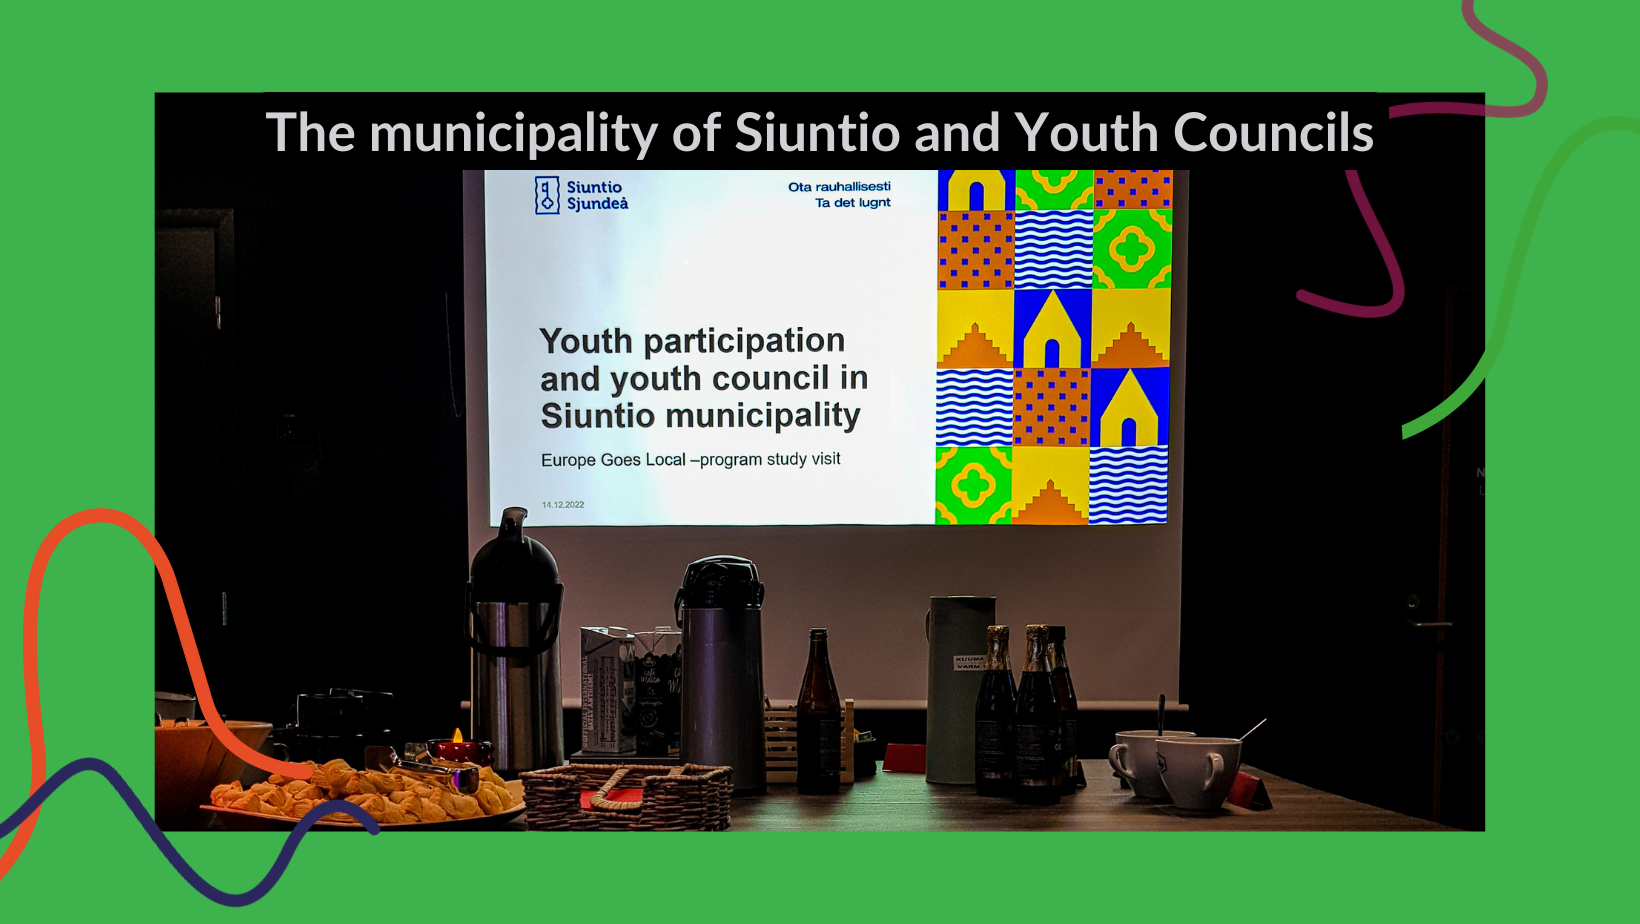 The municipality of Siuntio and Youth Councils